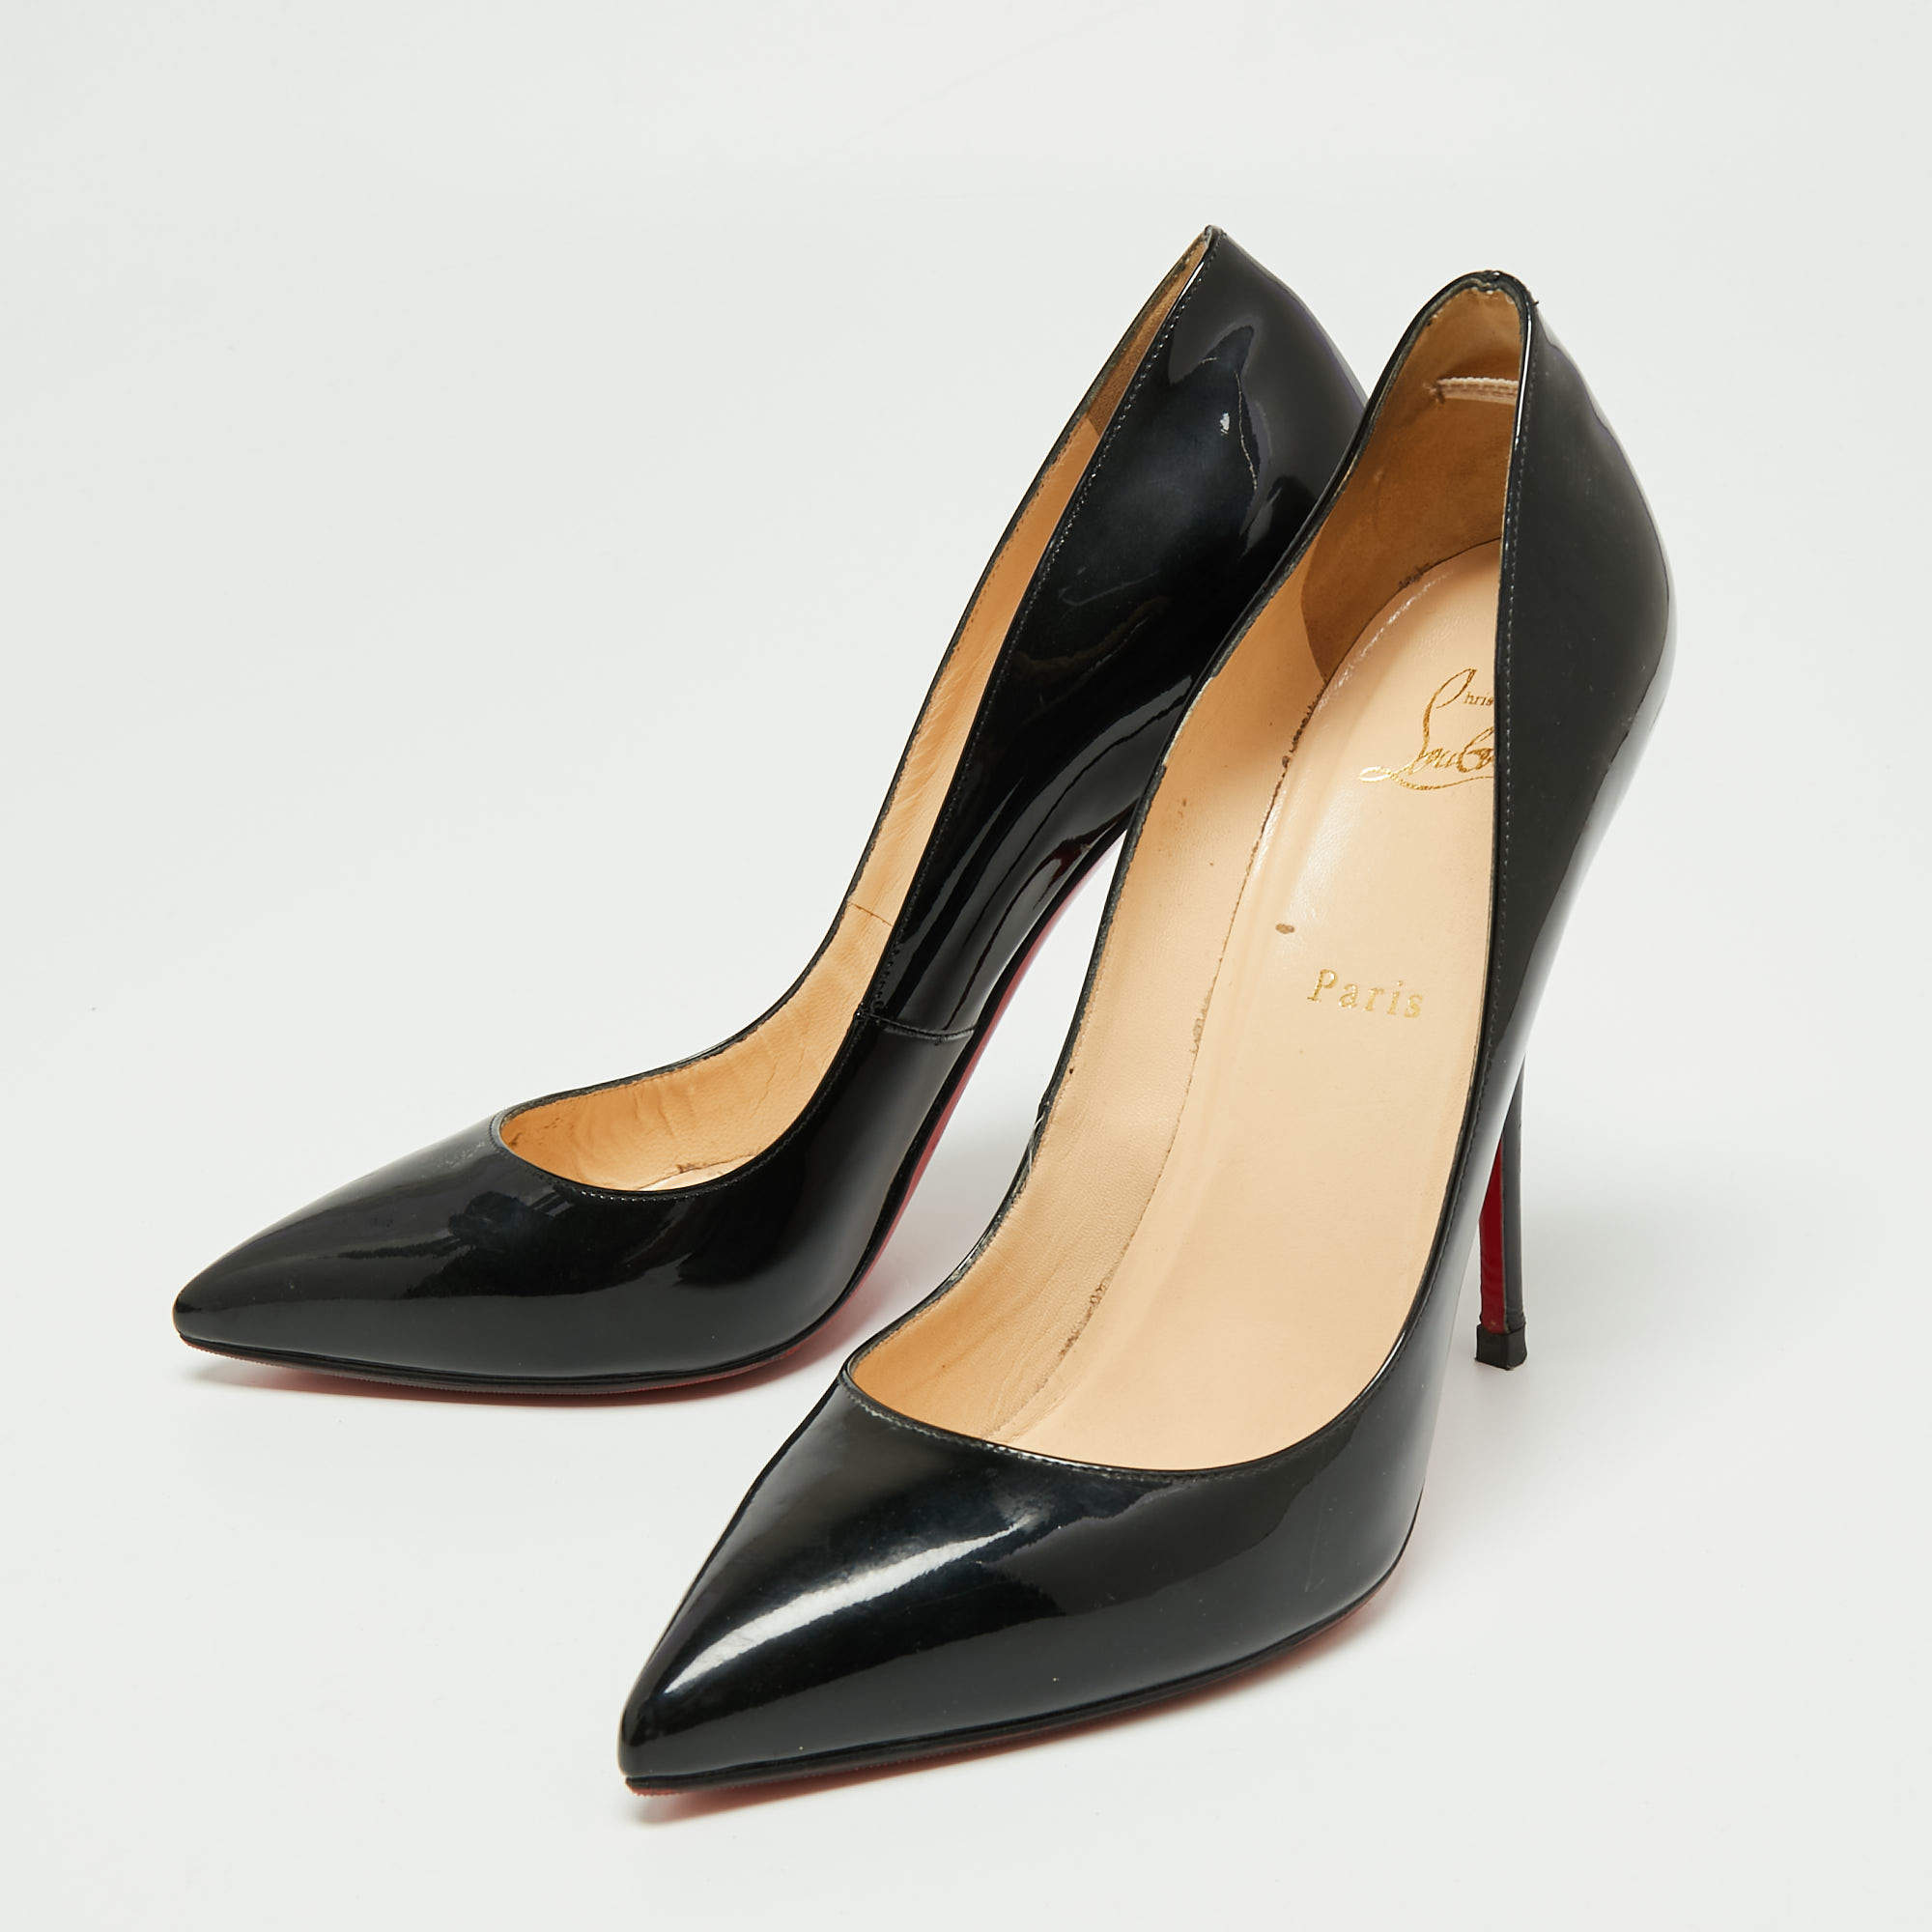 CHRISTIAN LOUBOUTIN Heels Patent Spikes Pigalle 120 Pumps 40.5